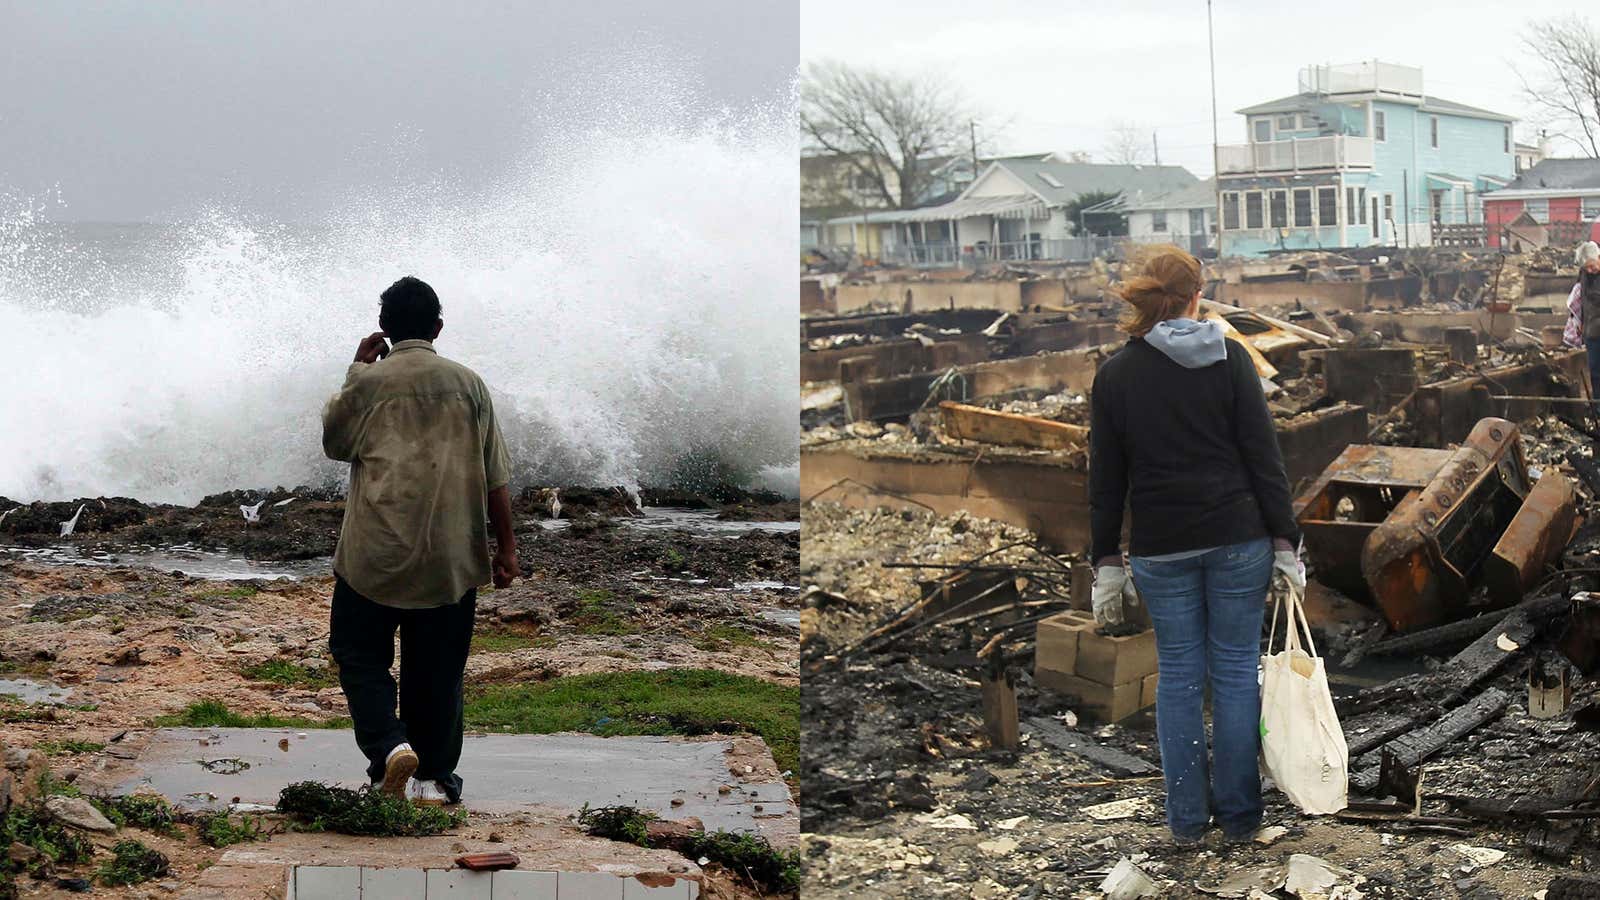 The scene in  Gibara, Cuba and Breezy Point, Queens, New York City